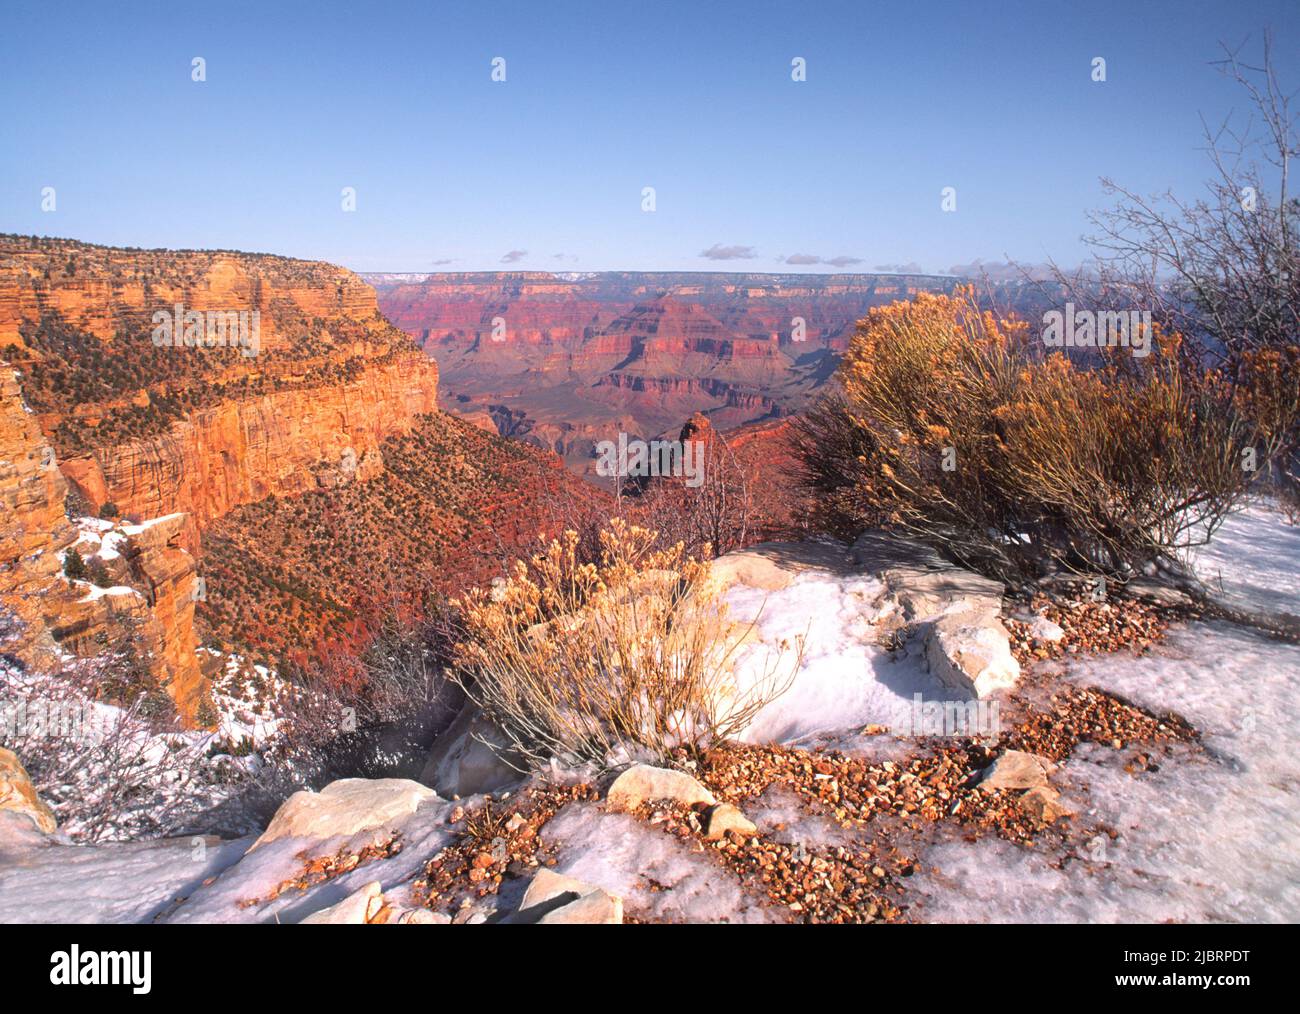 Grand Canyon National Park South Rim. Arizona, USA. Scenic landscape of canyons snow on ground. American National Parks.  World Heritage Site. Autumn Stock Photo